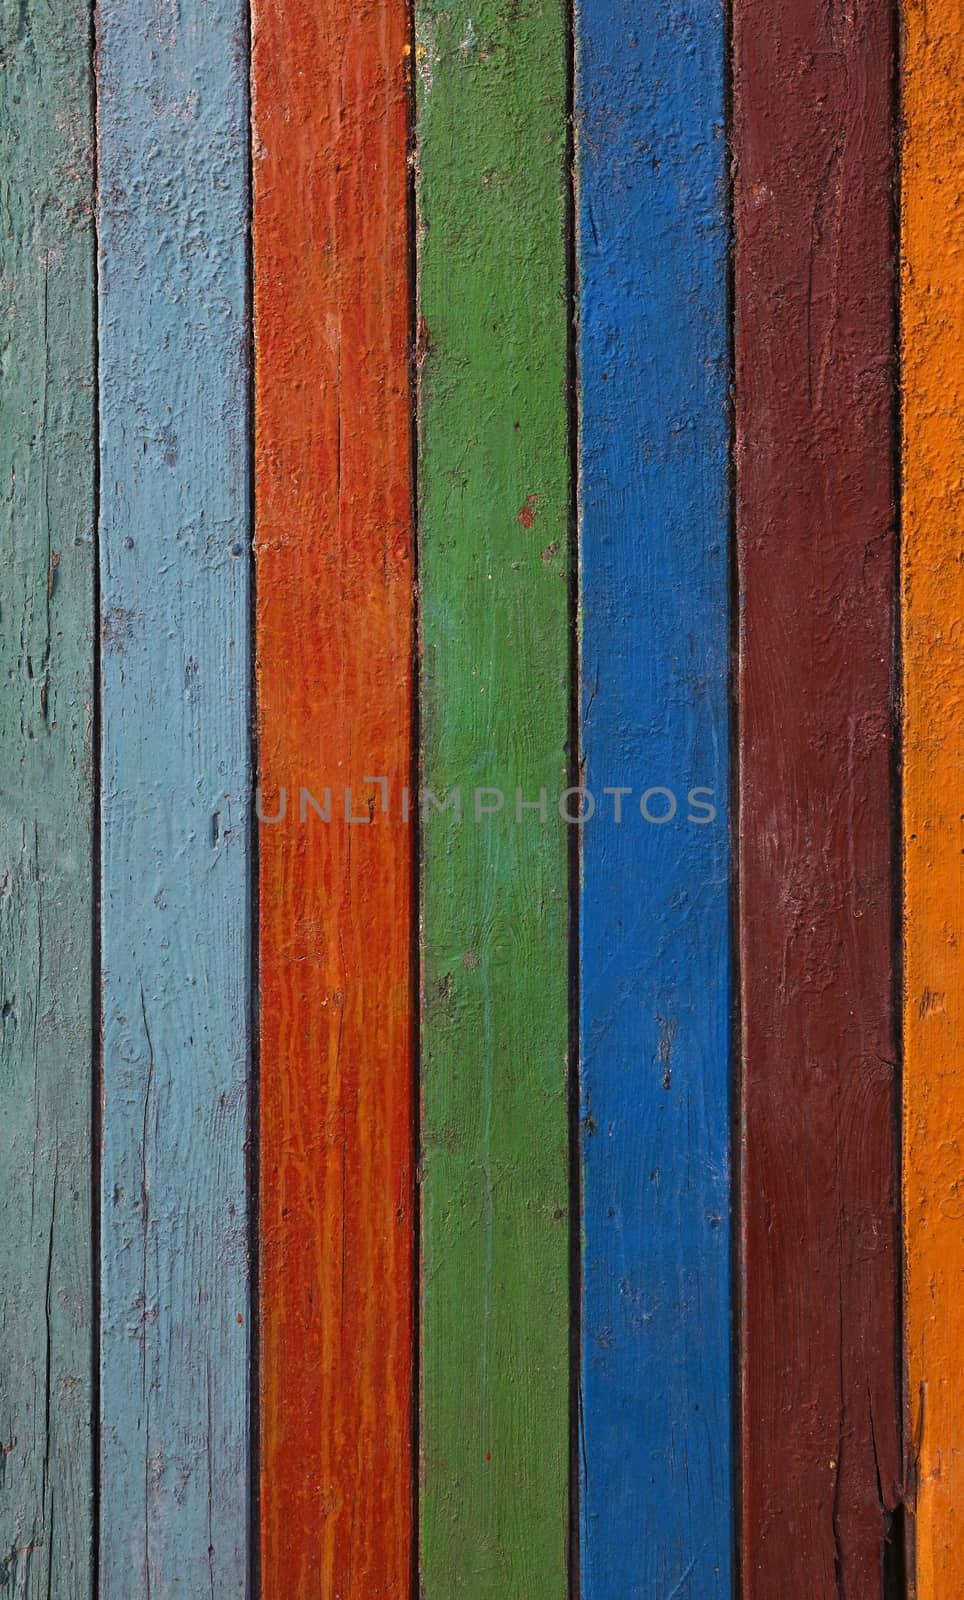 Multicolor old vintage grunge dirty painted colorful wooden planks background texture close up